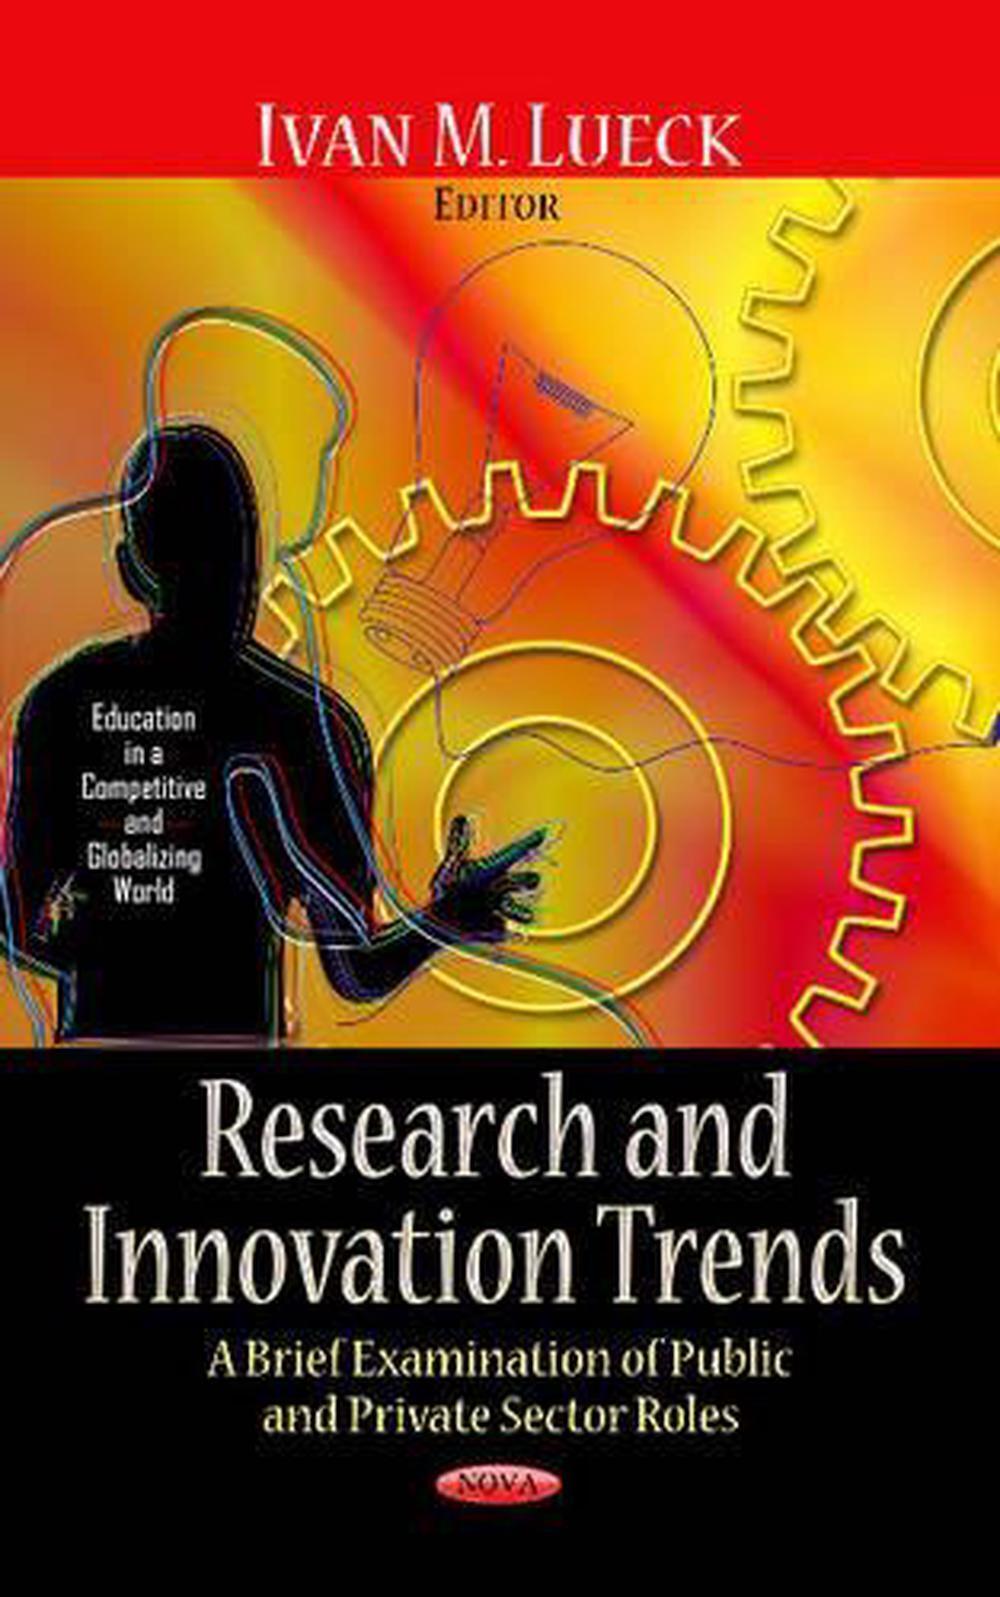 Research & Innovation Trends: A Brief Examination of Public & Private Sector Rol